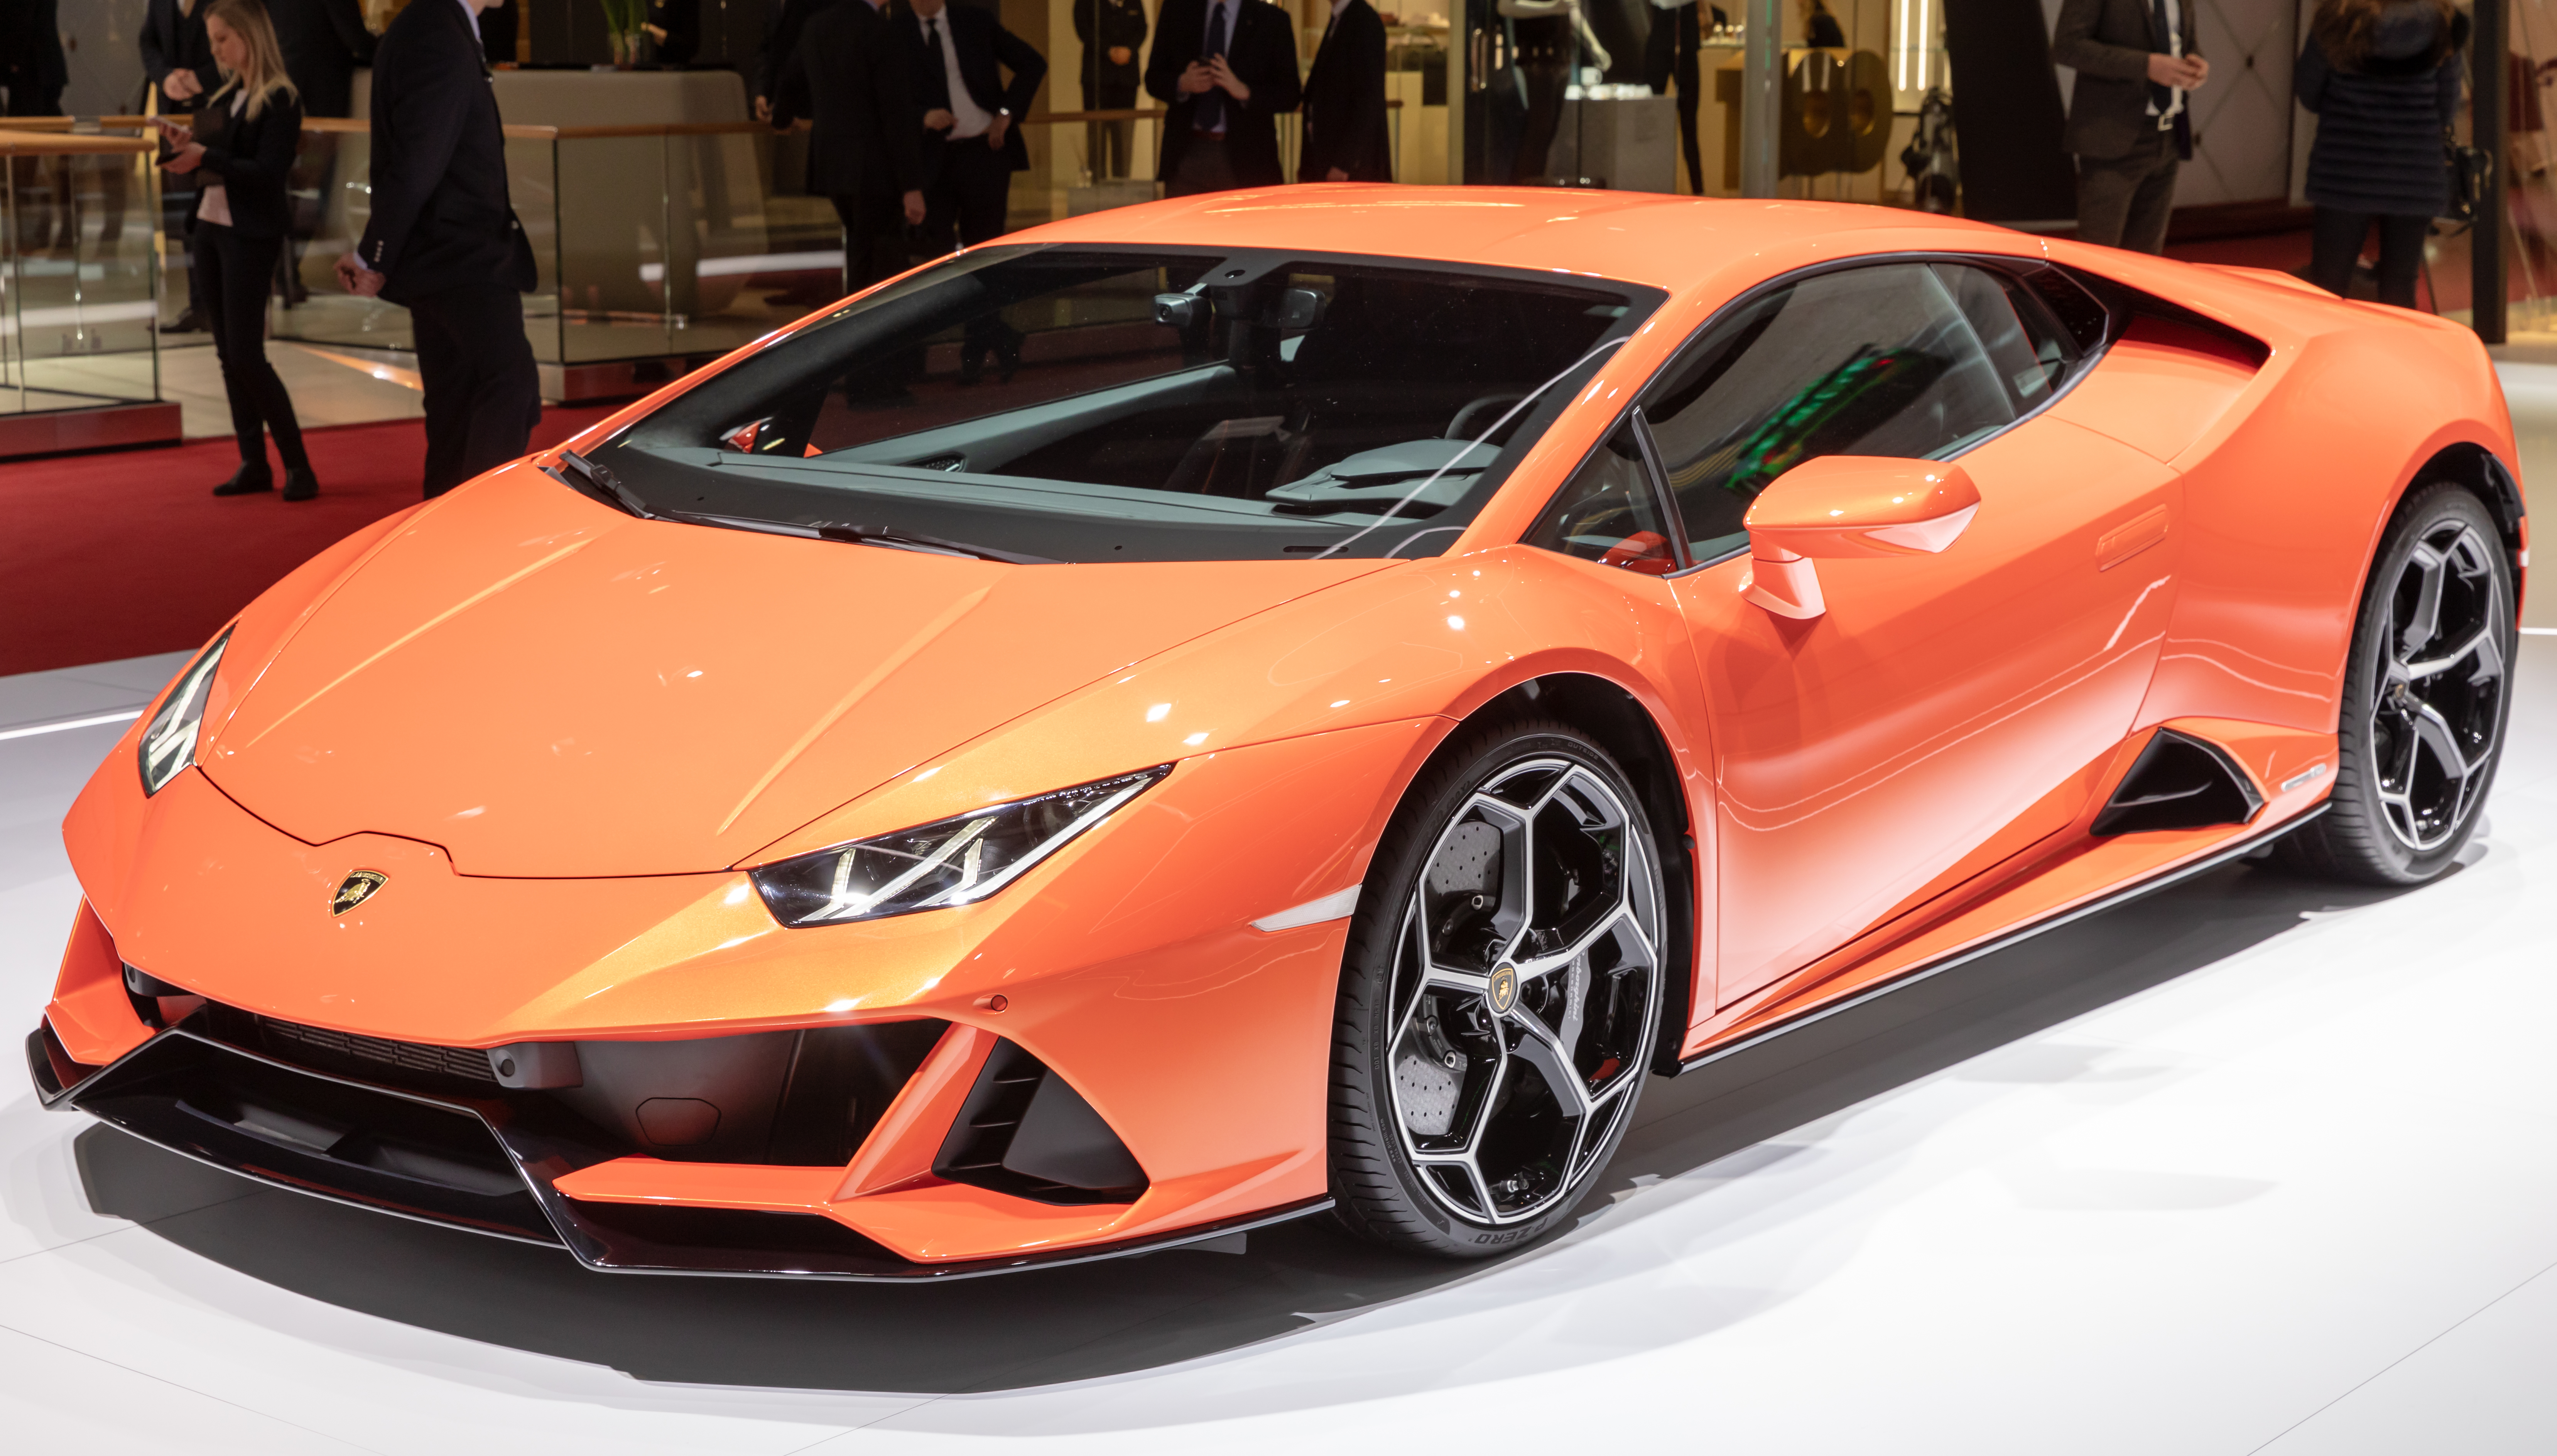 5. Thrills and Performance: Supercars Pushing the Limits Beyond what Lamborghini Offers